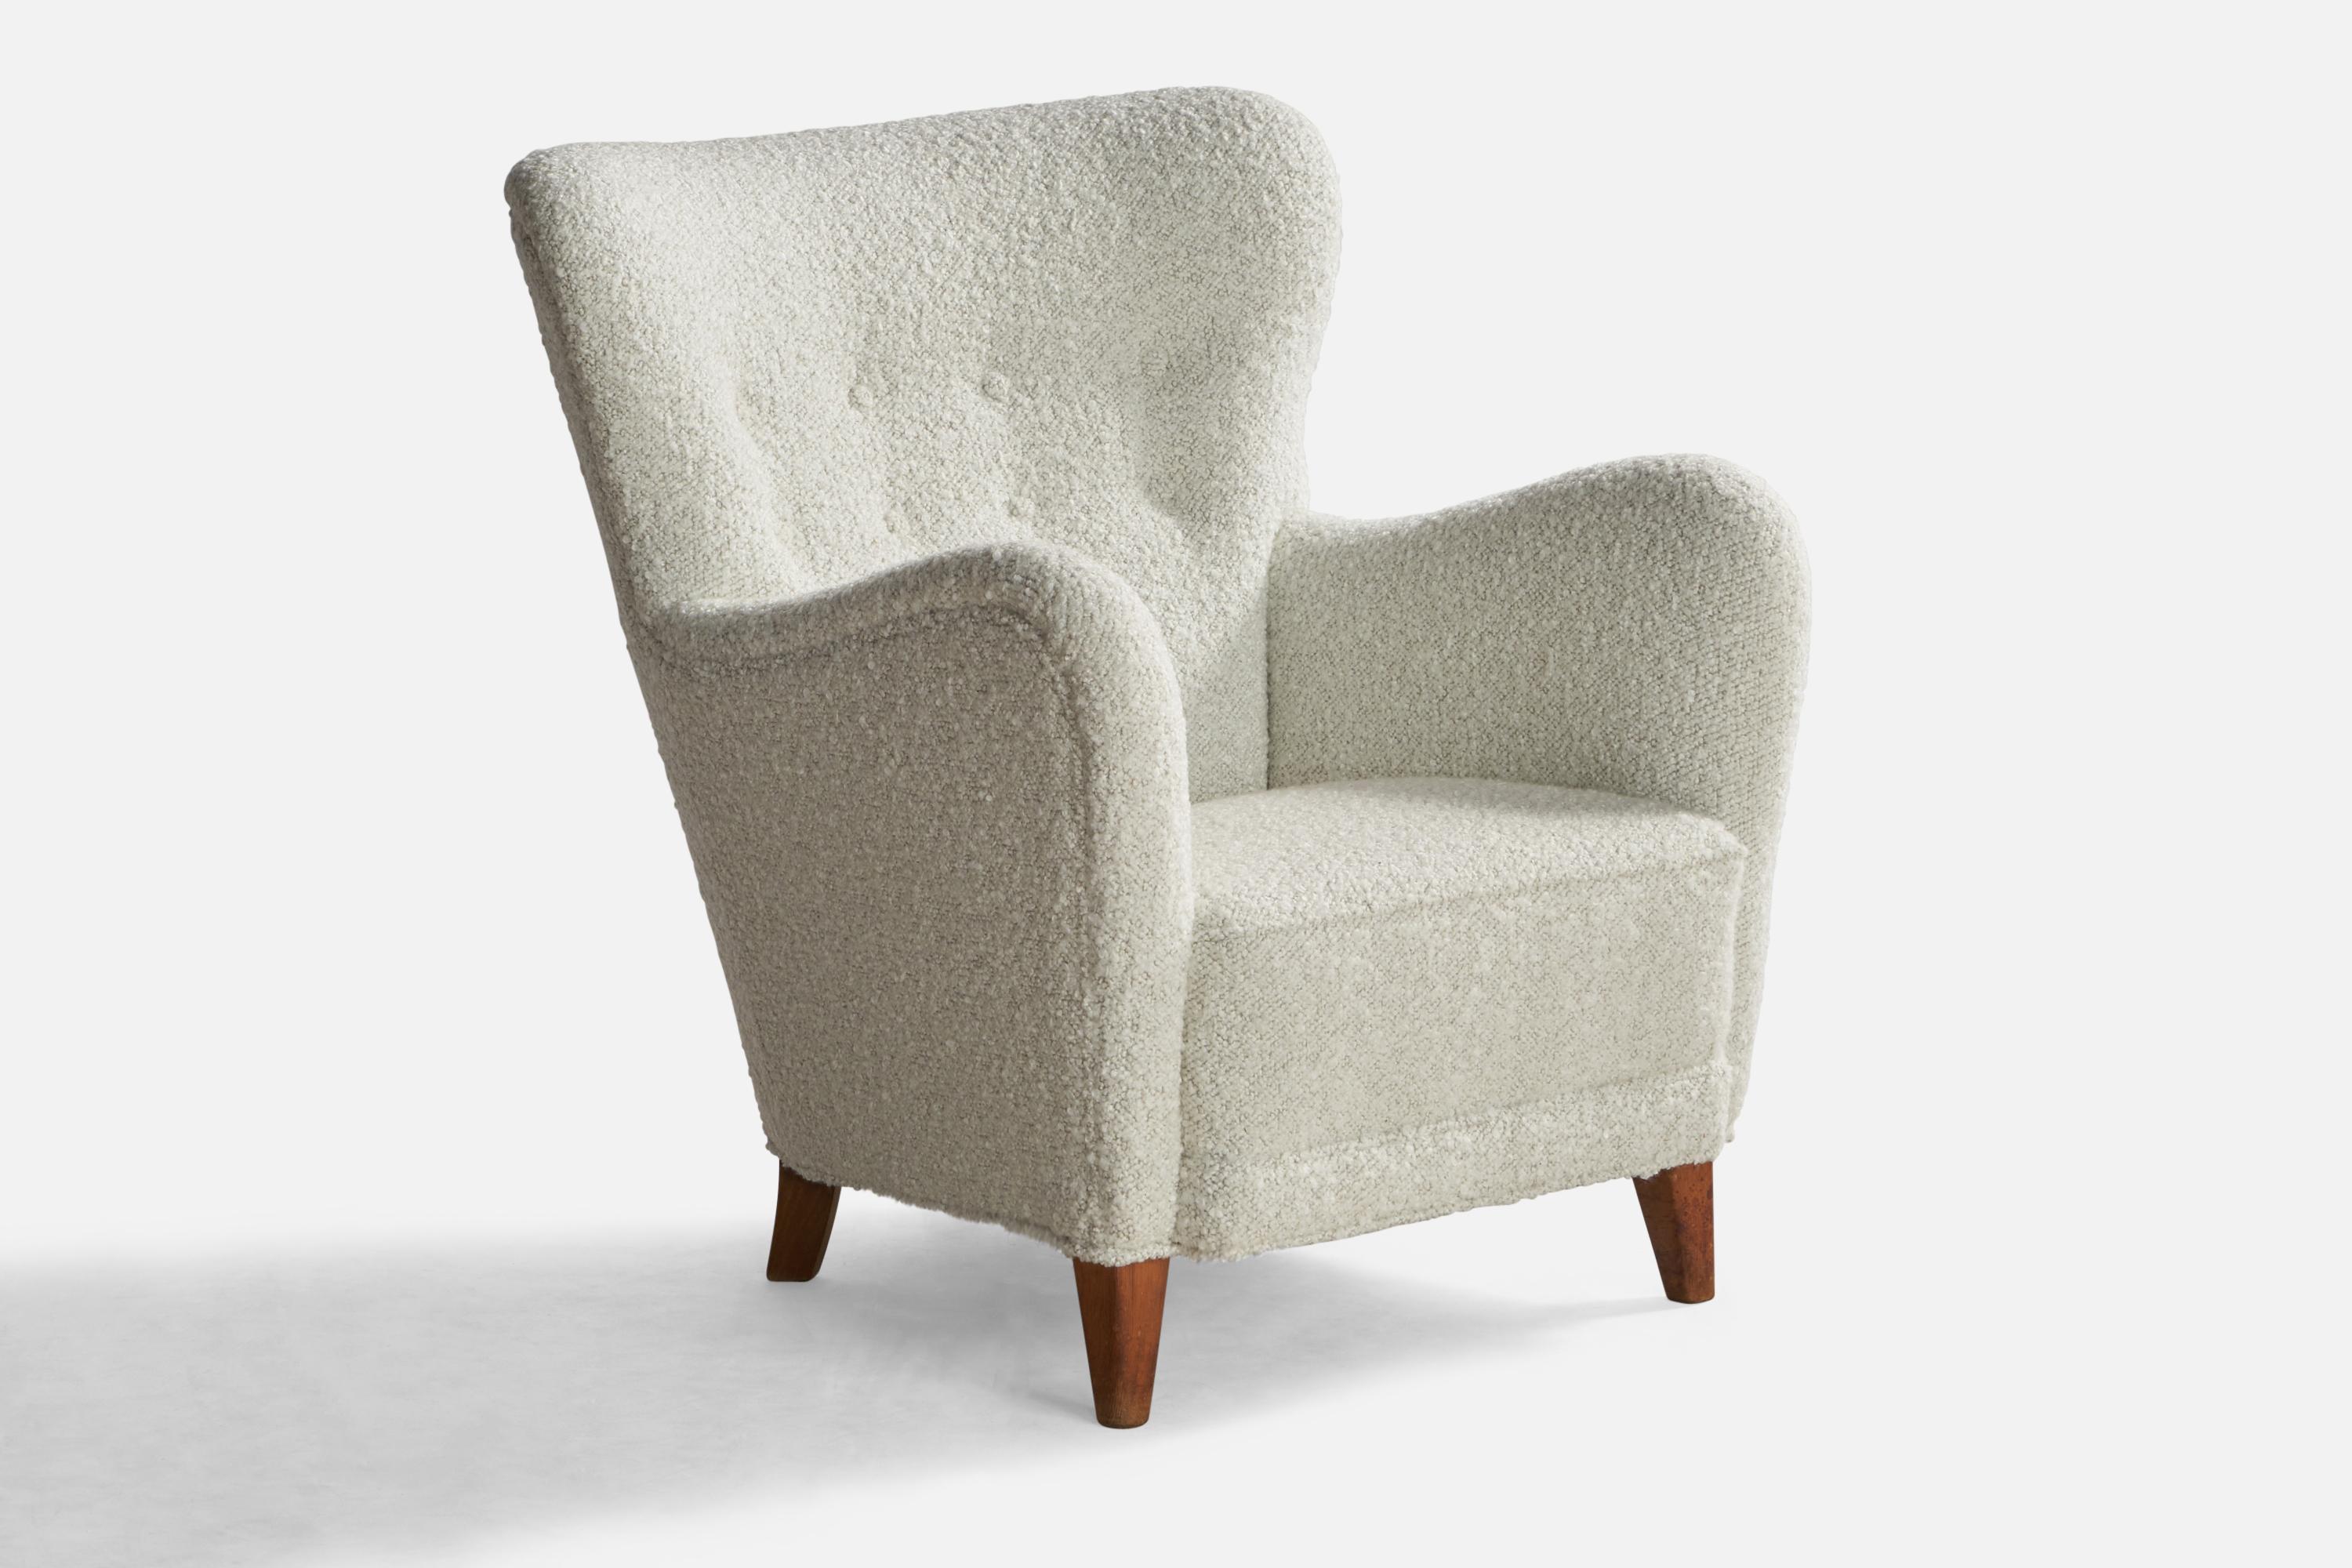 A wood and off-white bouclé fabric lounge chair designed and produced in Denmark, 1940s.

Seat height: 15.7